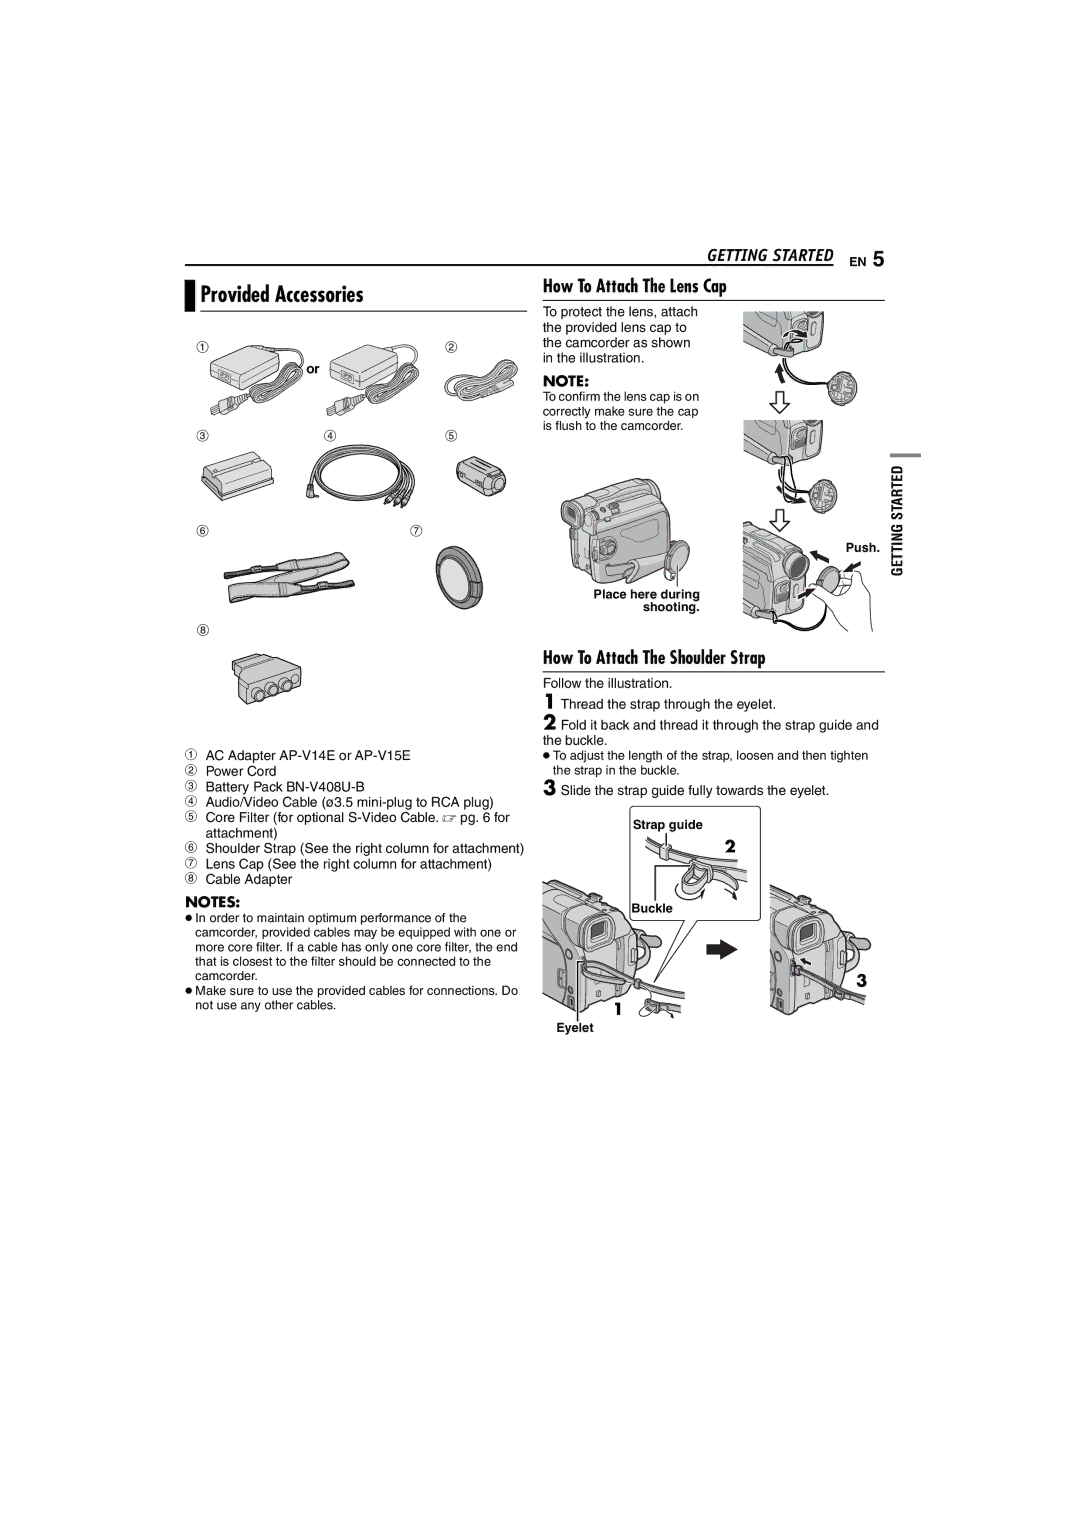 JVC GR-D225 manual Provided Accessories, Getting Started EN, How To Attach The Shoulder Strap 